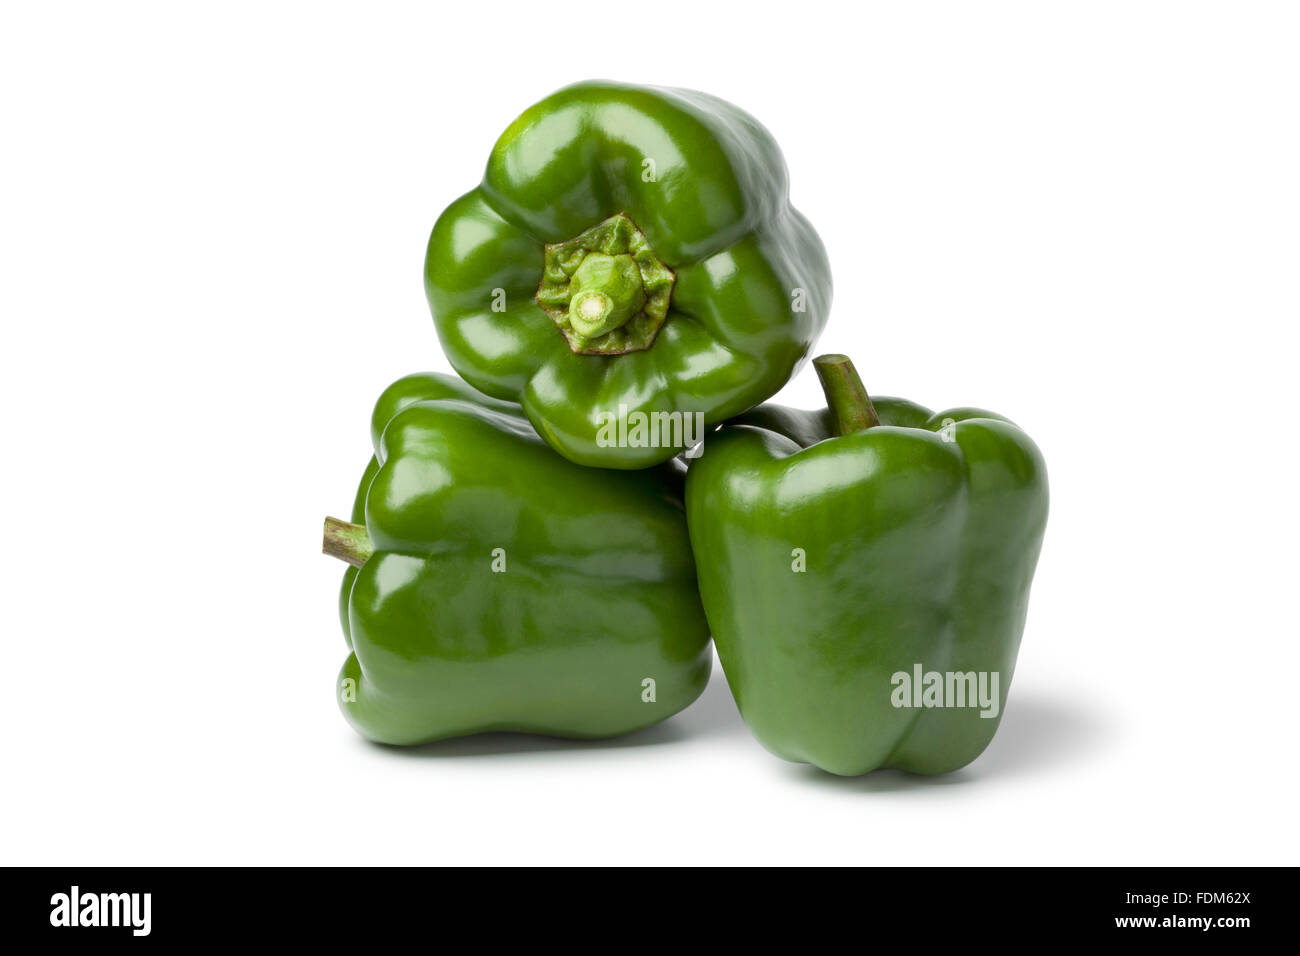 Fresh green bell peppers on white background Stock Photo